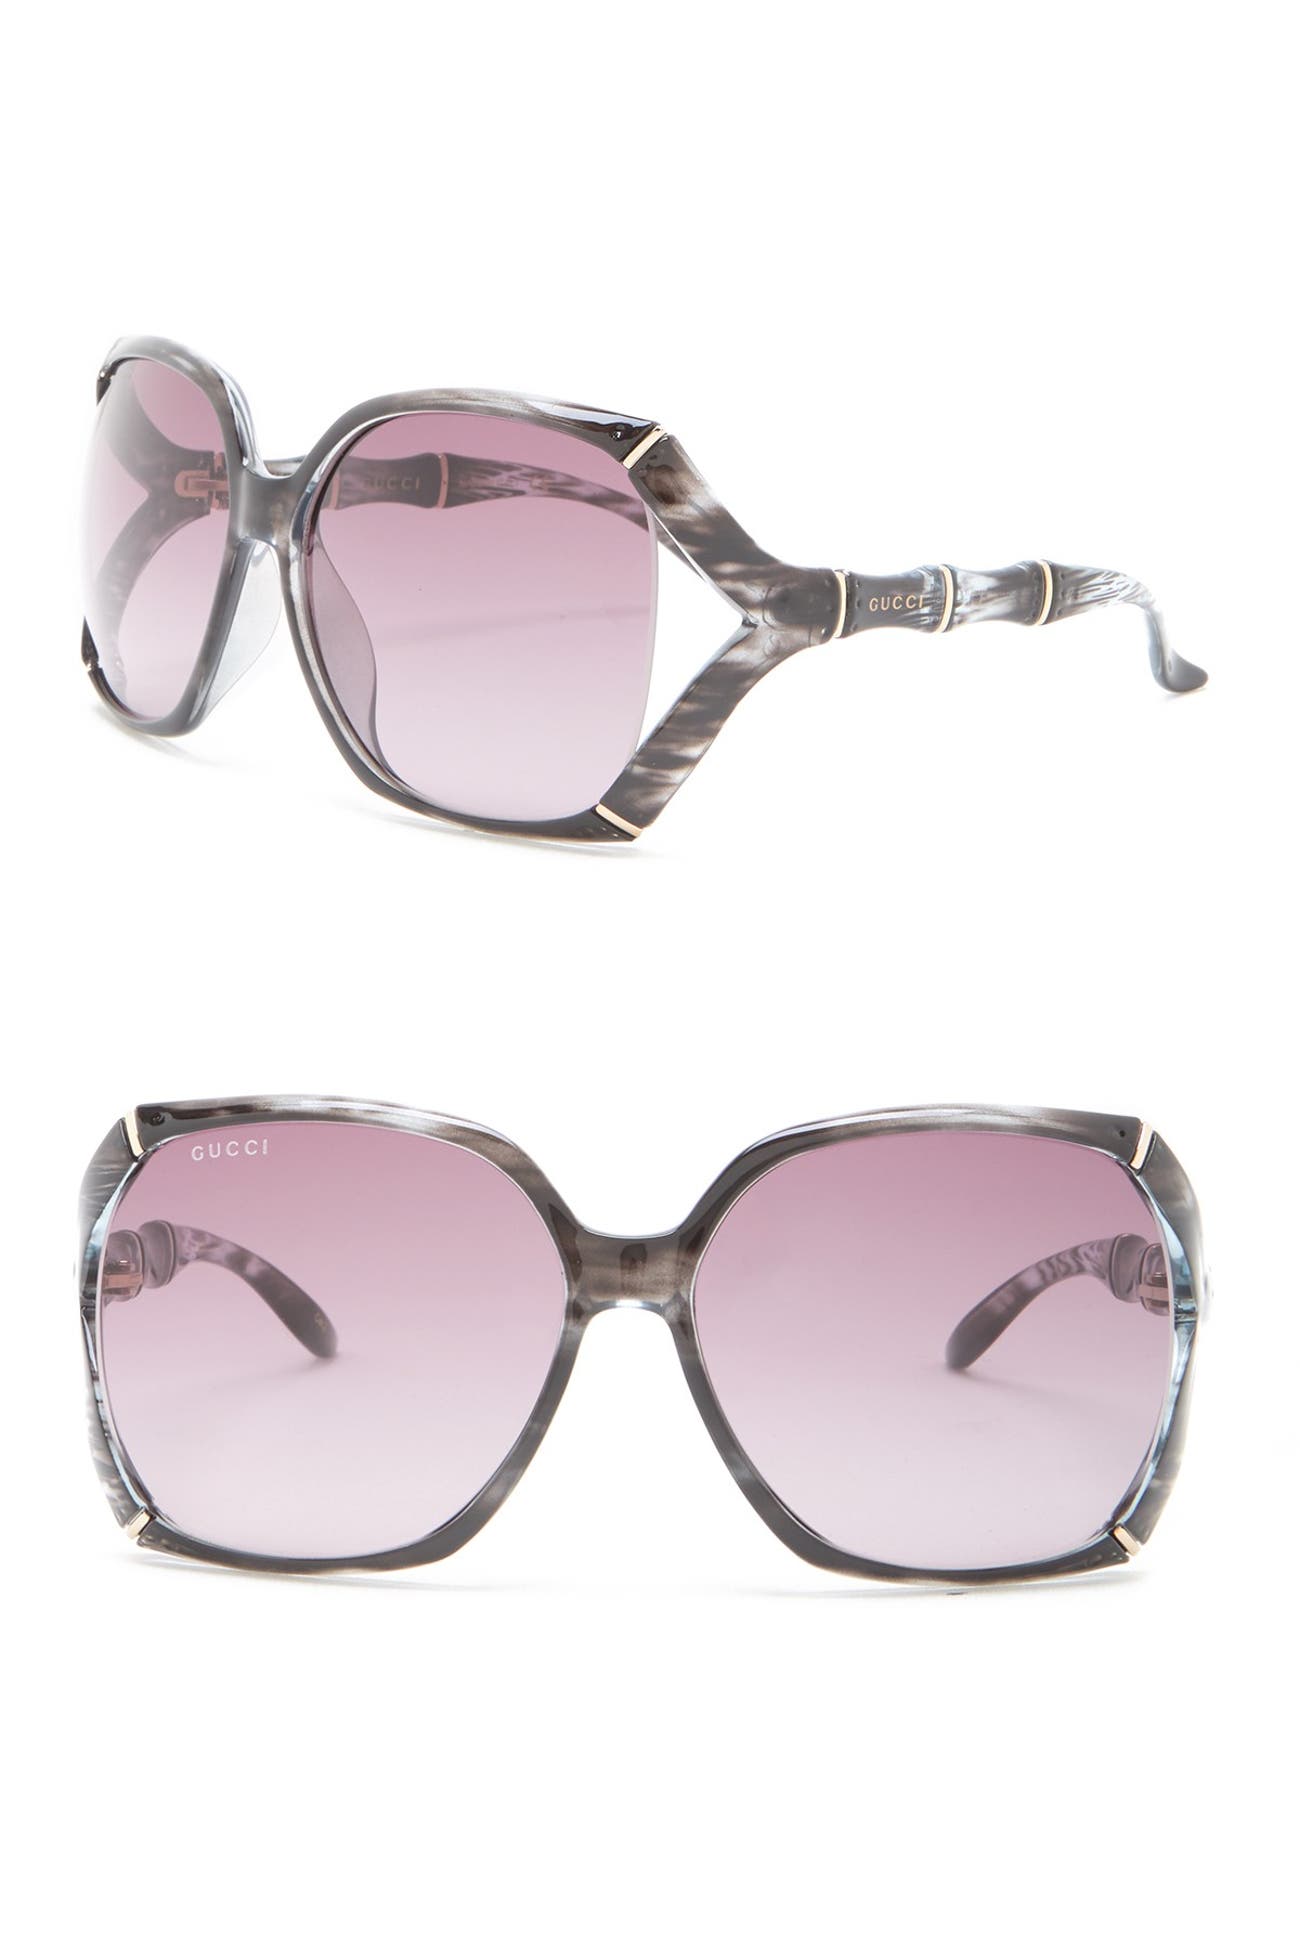 GUCCI | 58mm Oversized Square Sunglasses | Nordstrom Rack